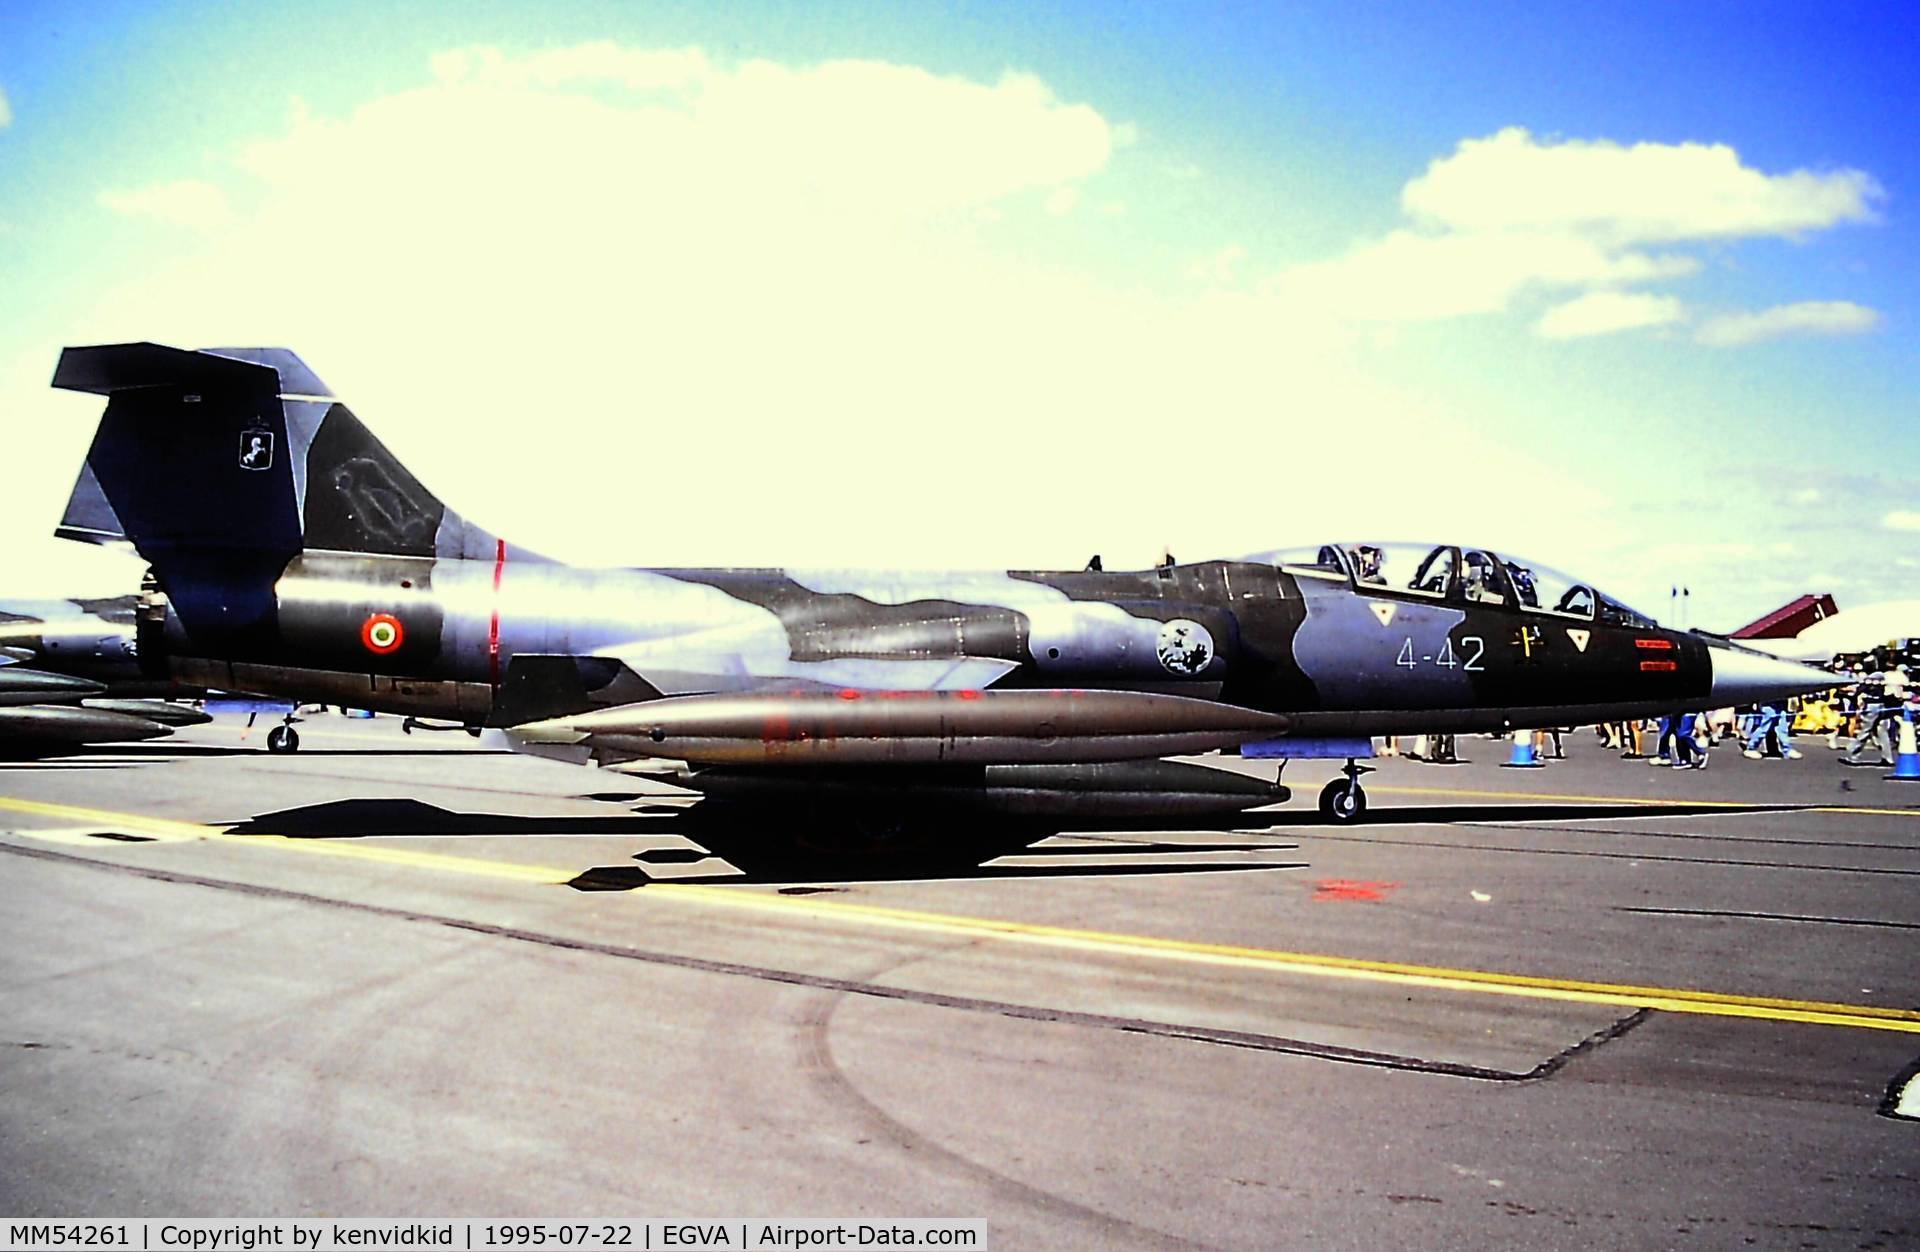 MM54261, Lockheed TF-104G Starfighter C/N 583H-5212, At the 1995 Fairford International Air Tattoo, scanned from slide.